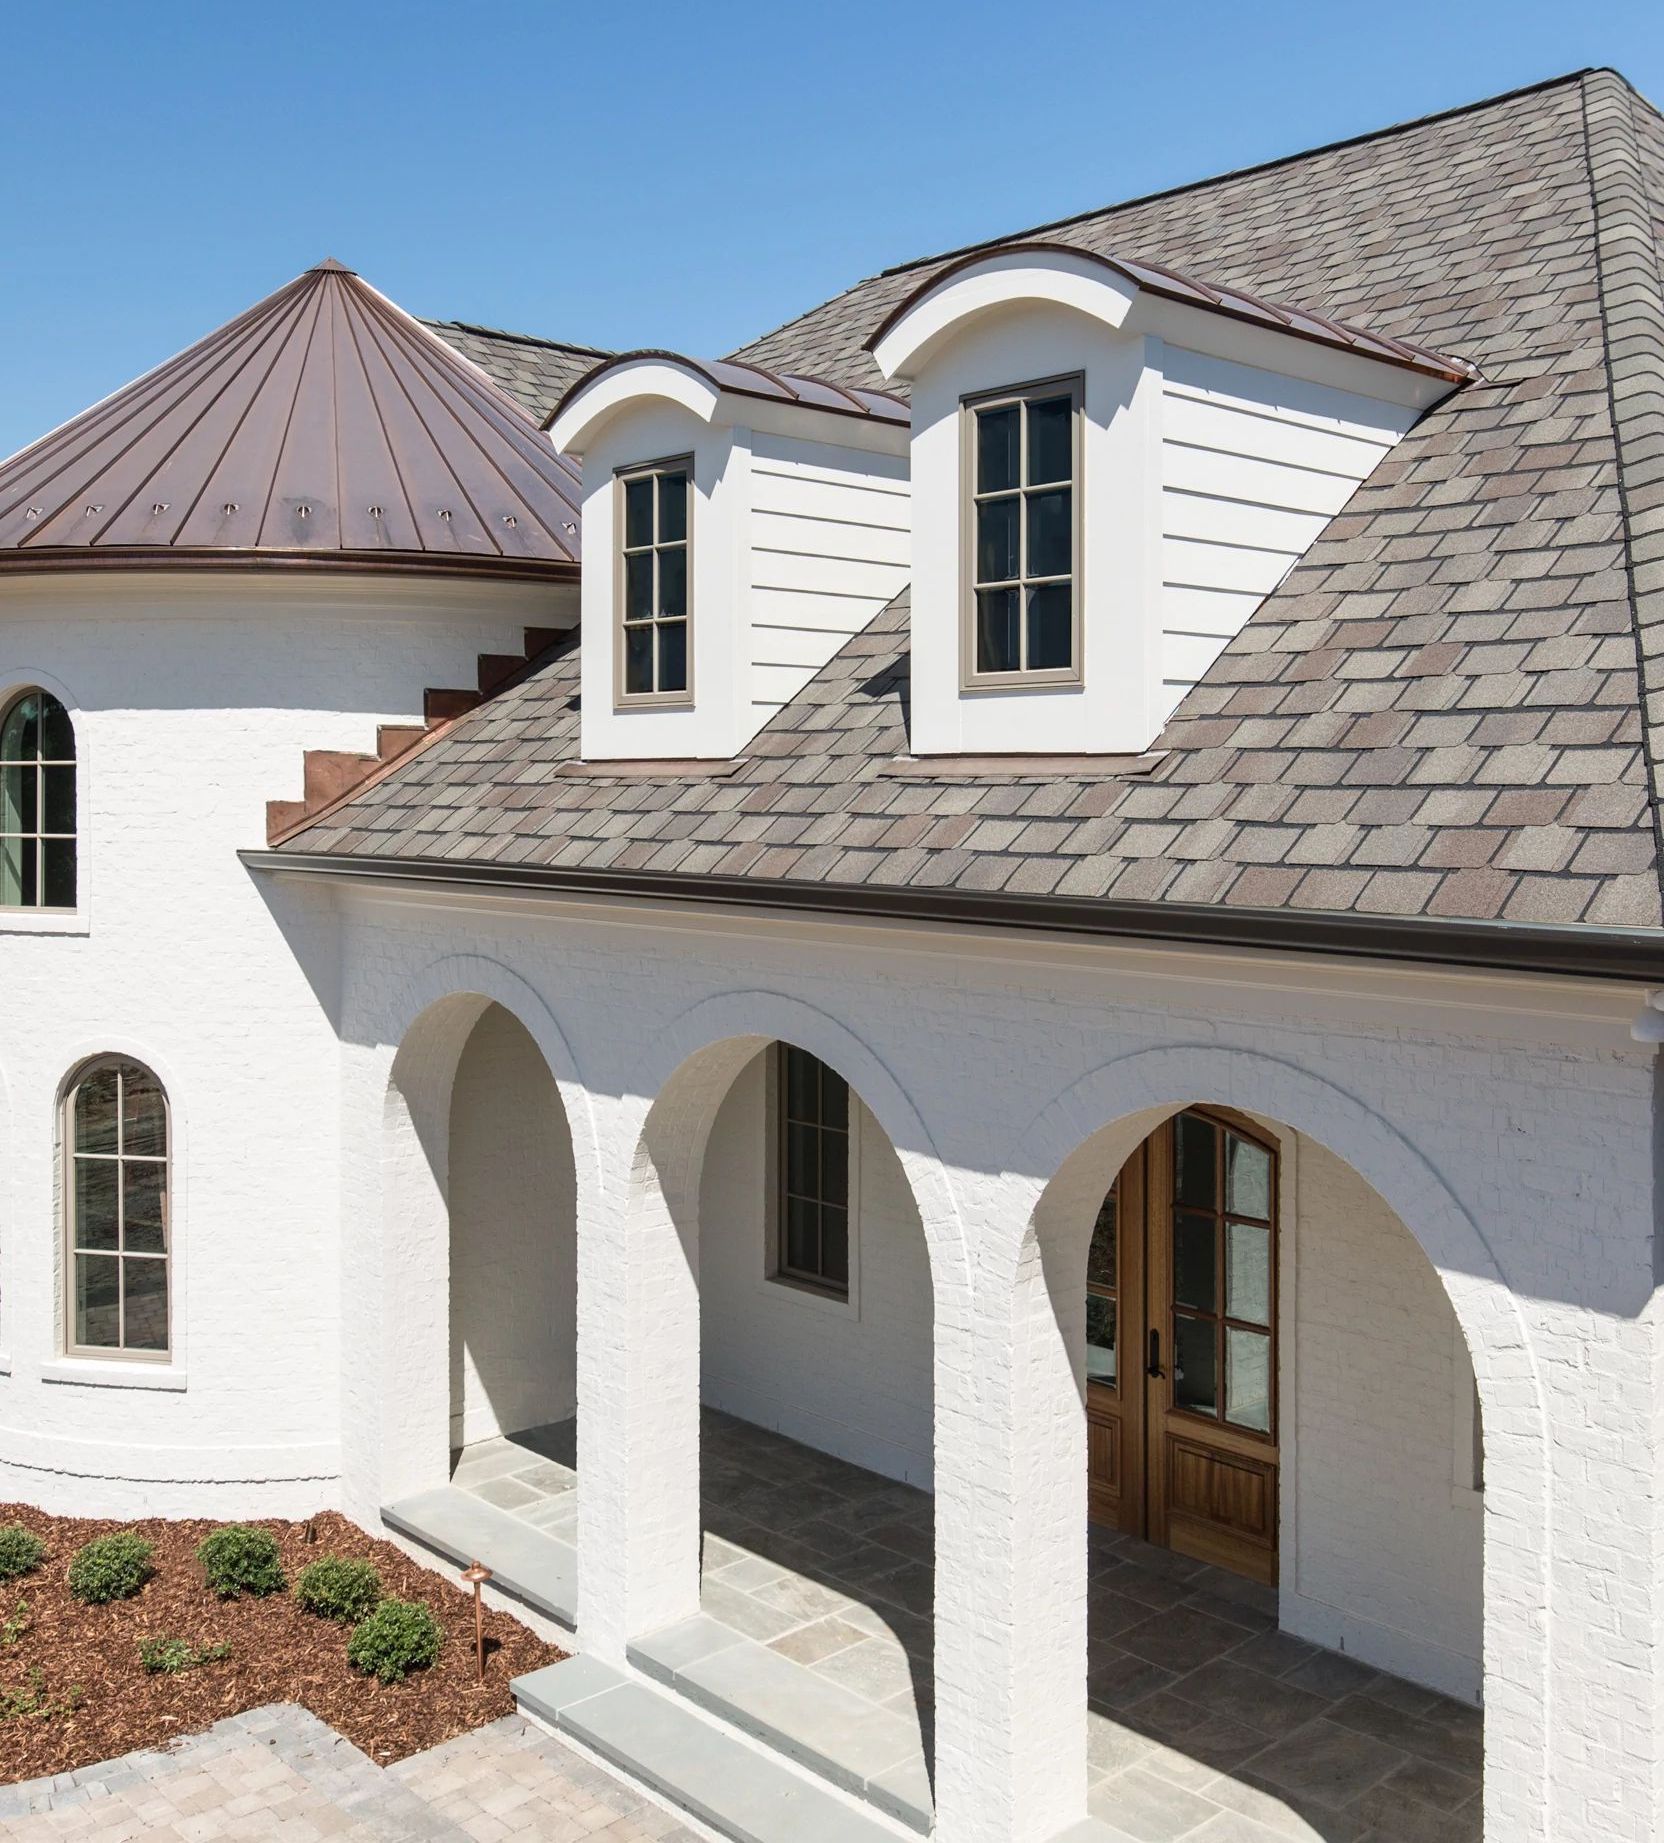 Now it is easy to imagine the various roofing materials displayed to showcase options. Click here to user the SRS Exteriors Free Visualizer Tool and upload the image of your home to begin your project today!